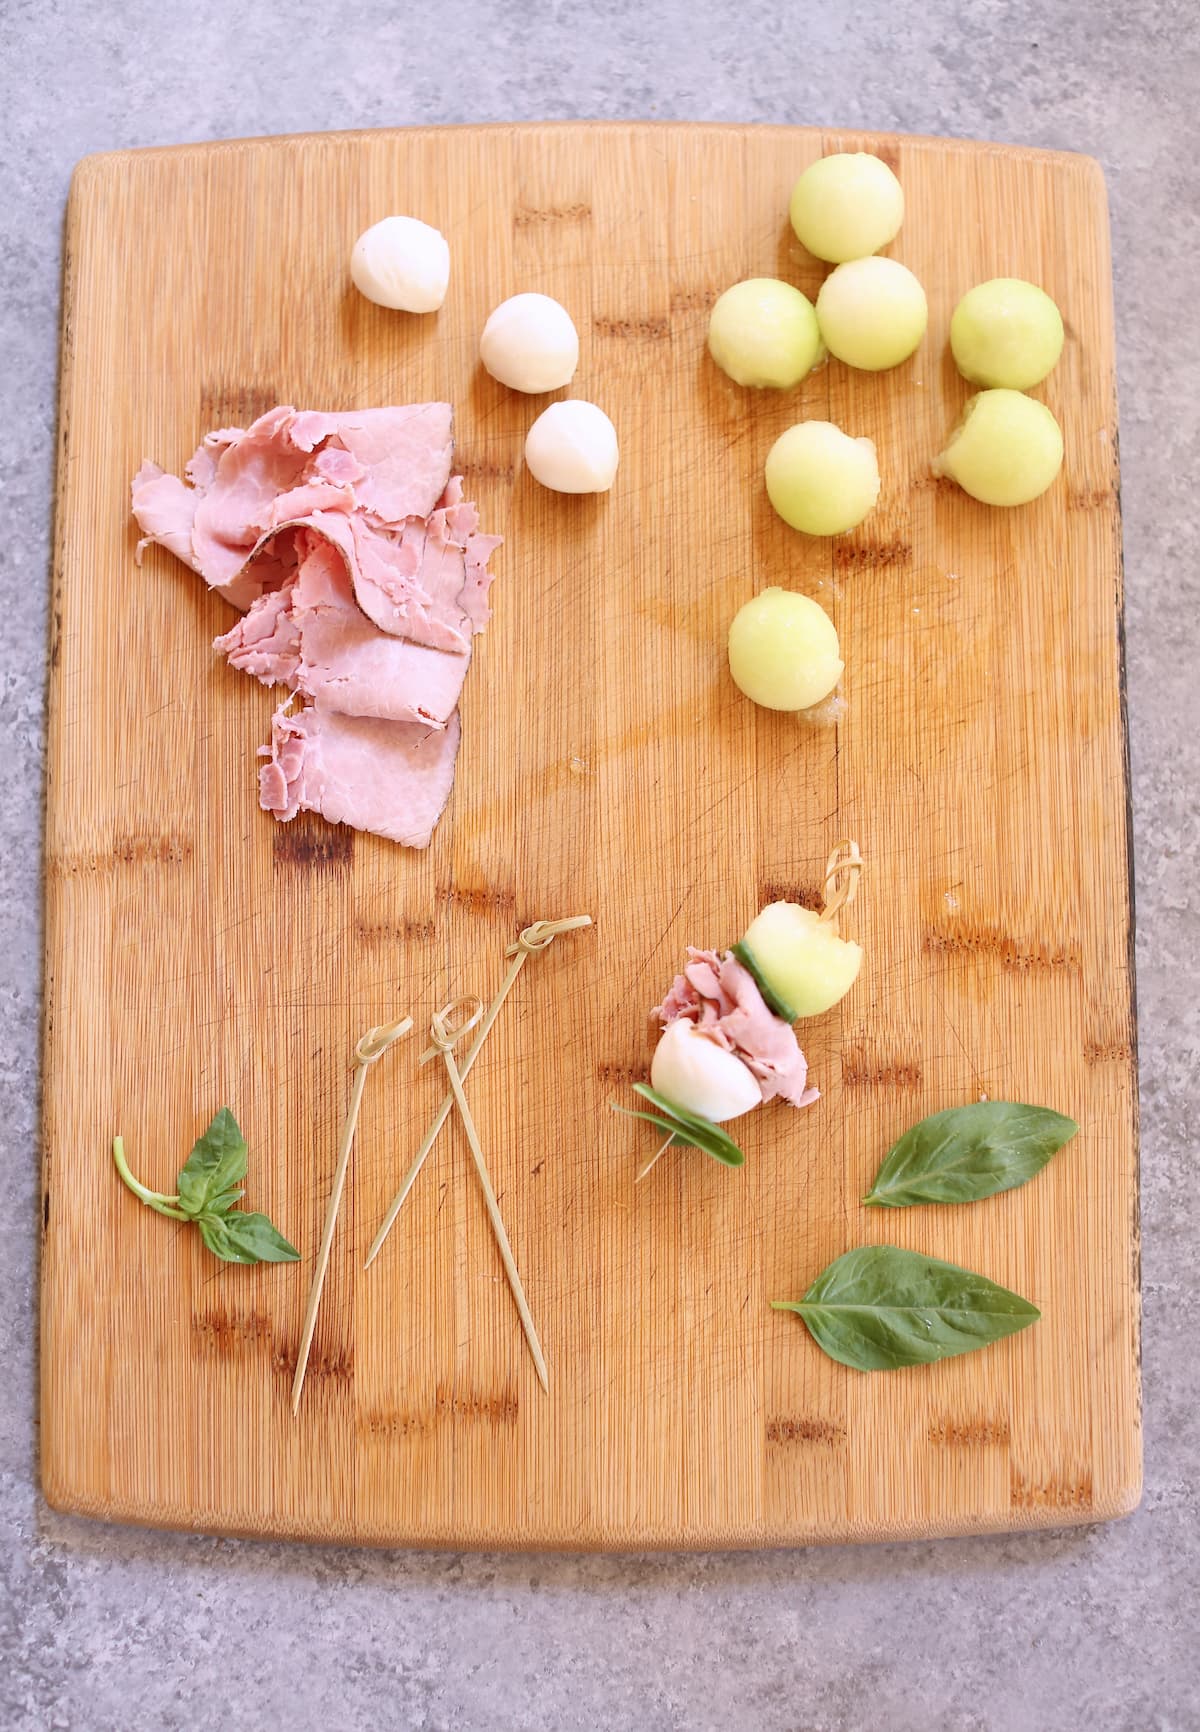 a cutting board of melon ball appetizer ingredients.